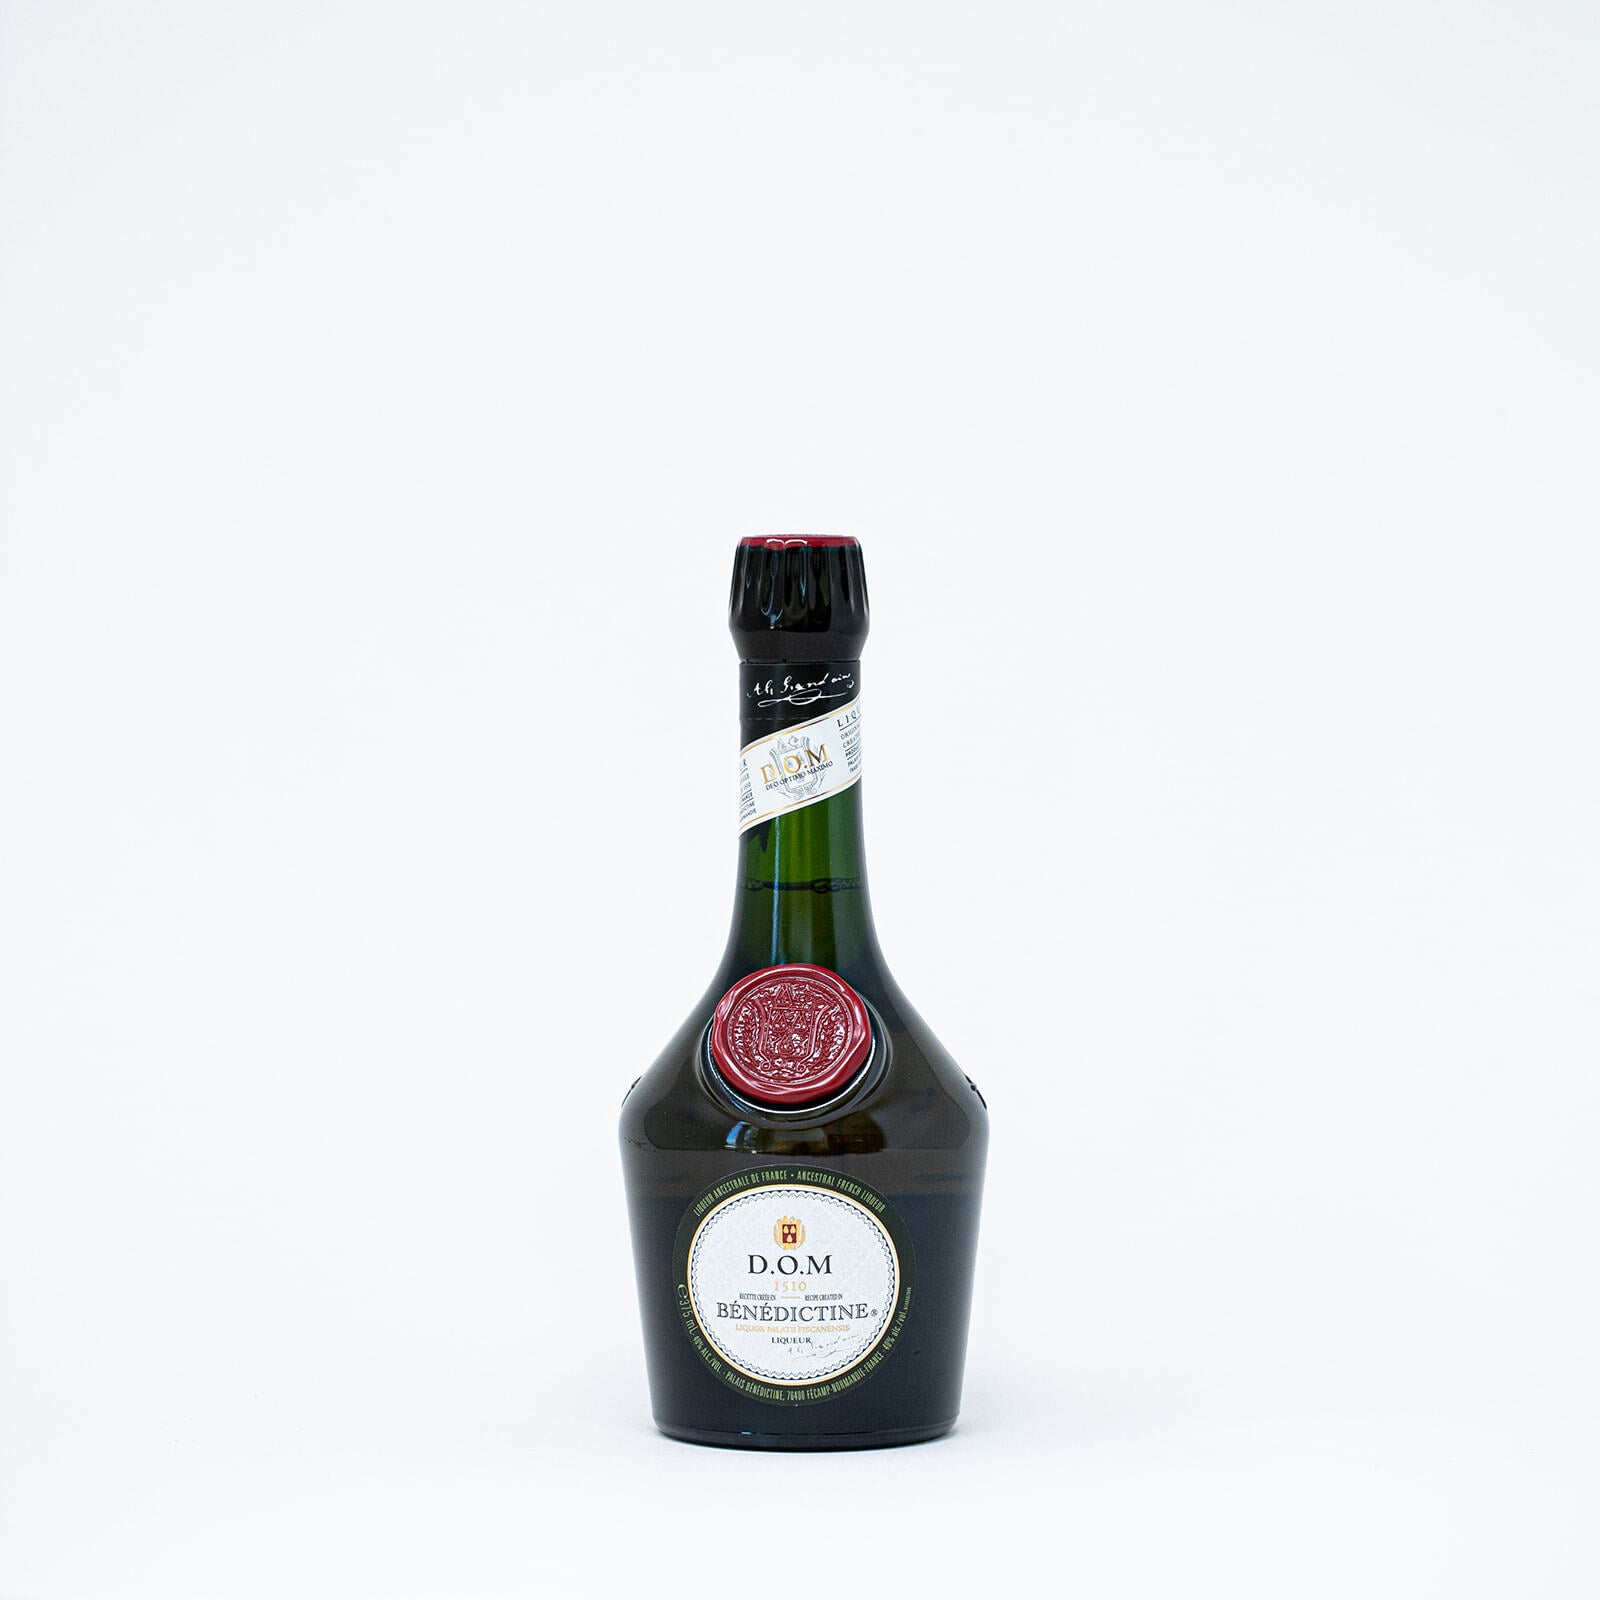 BENEDICTINE LIQUEUR 375ML 40% ABV  #gethilo On-Demand Delivery or Curbside  Pickup in LA, LBC, and Costa Mesa!